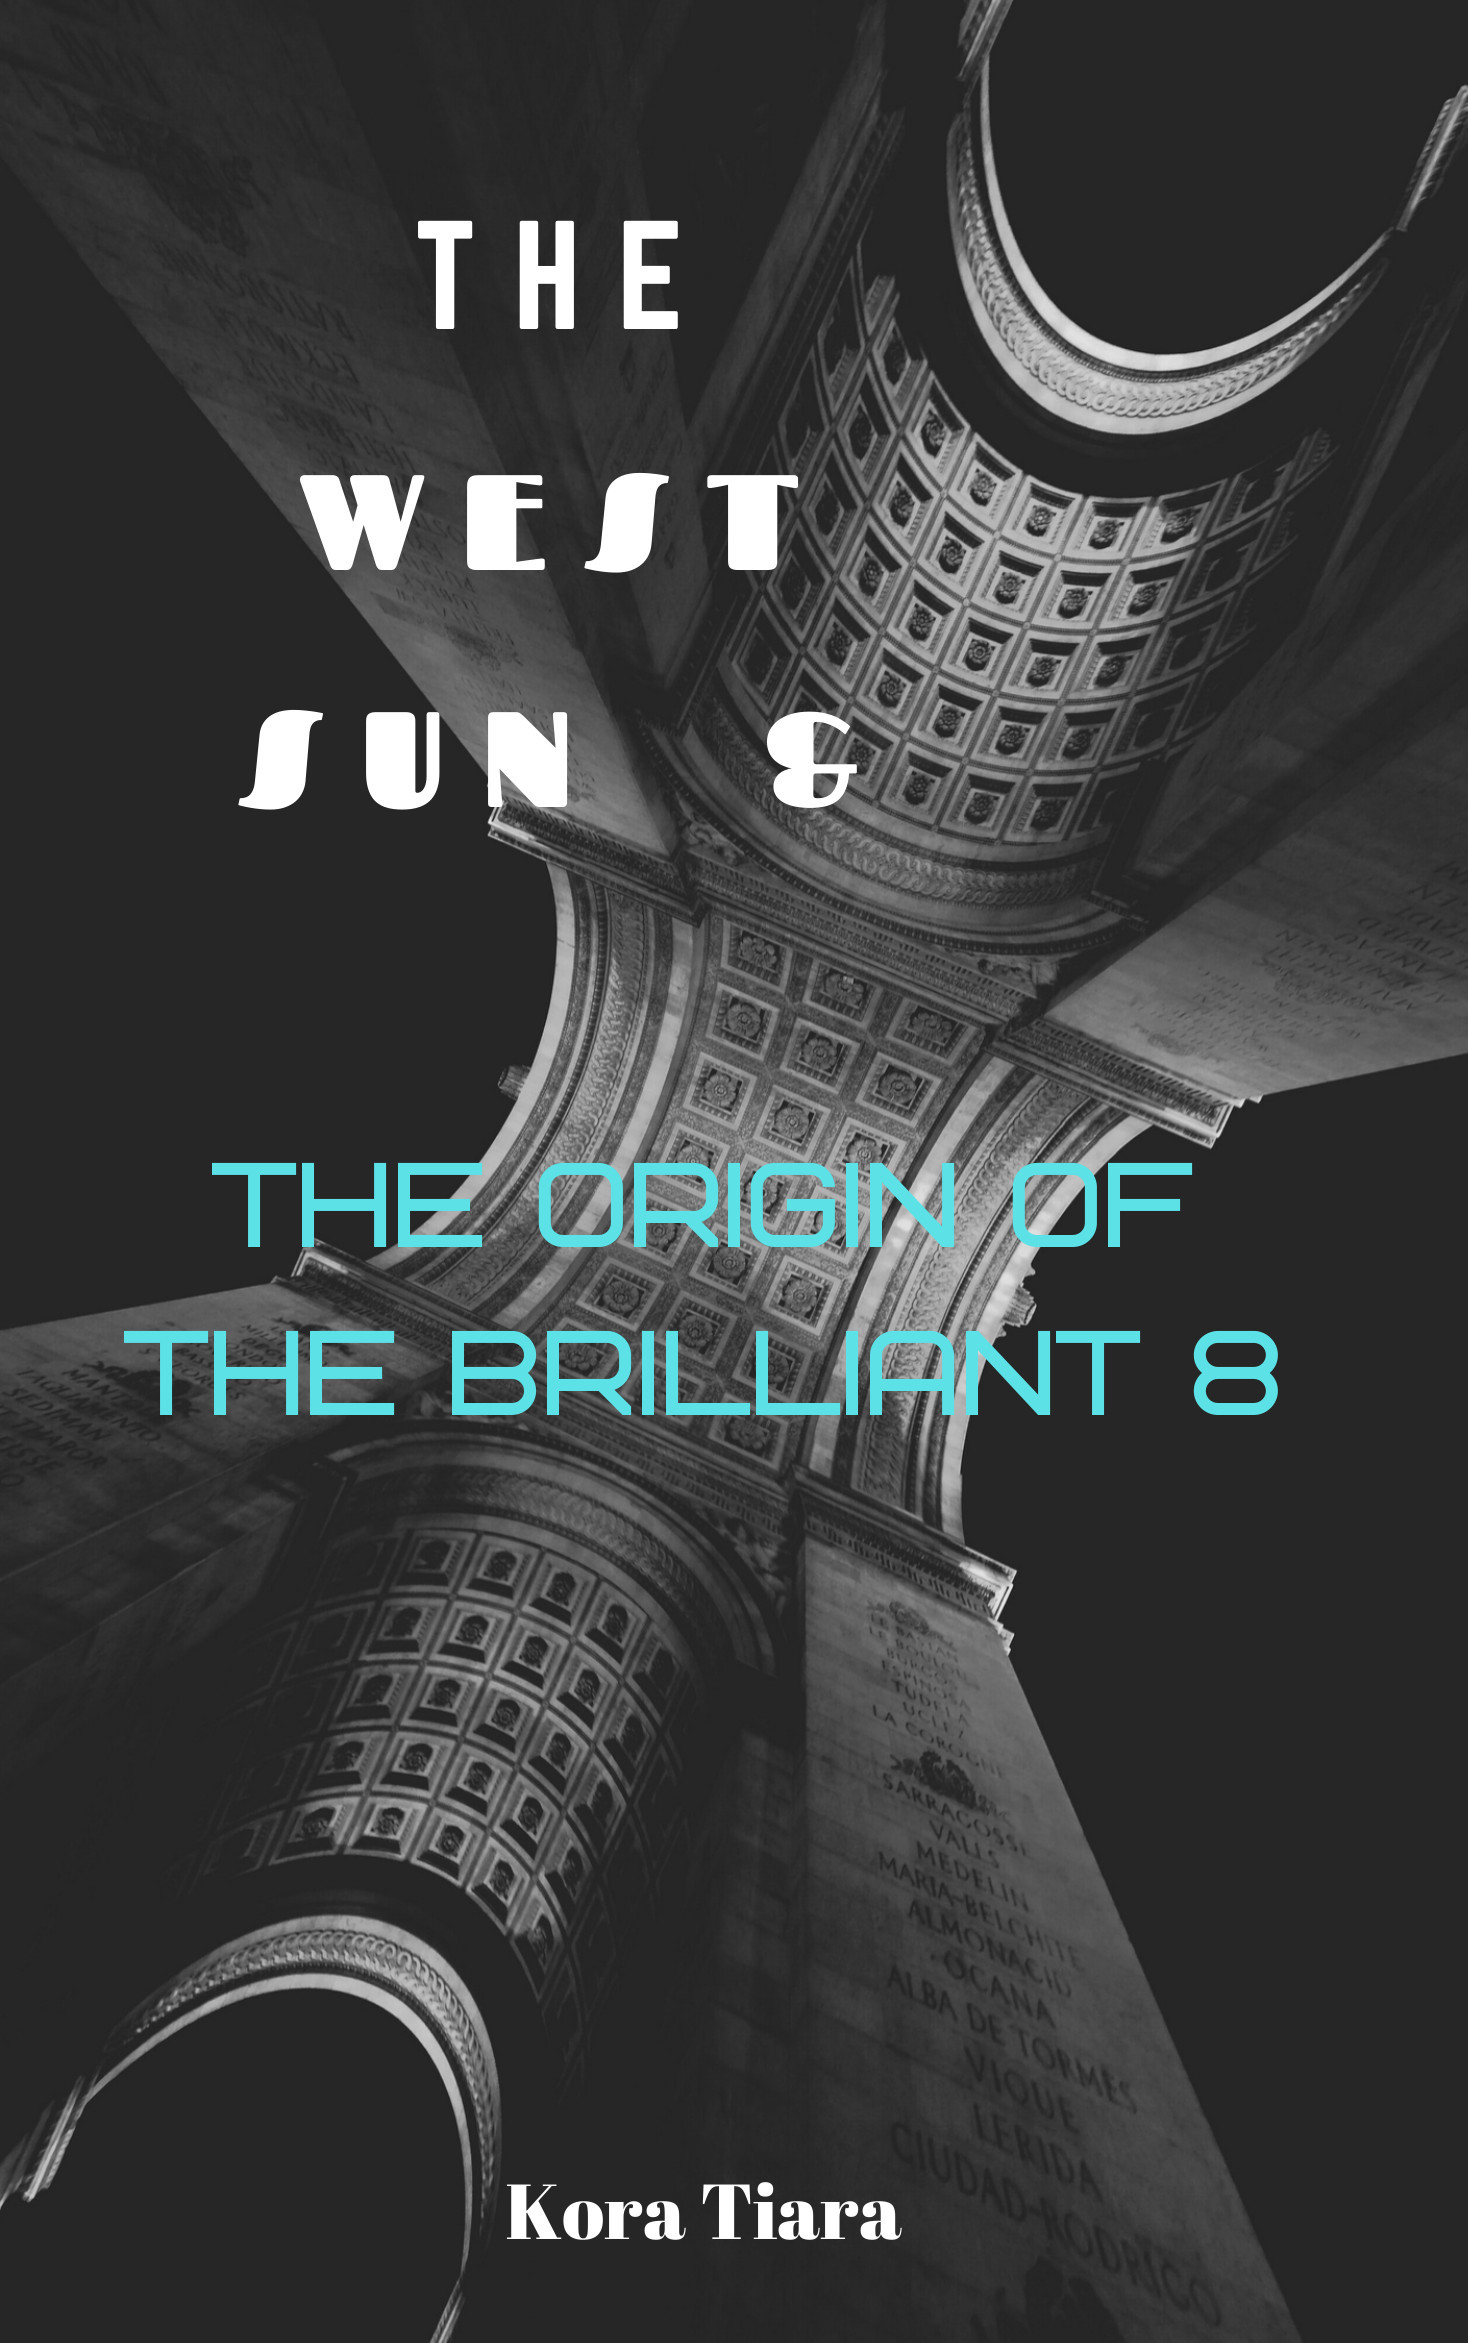 FREE: The West Sun and The Origin of the Brilliant 8 by Kora Tiara